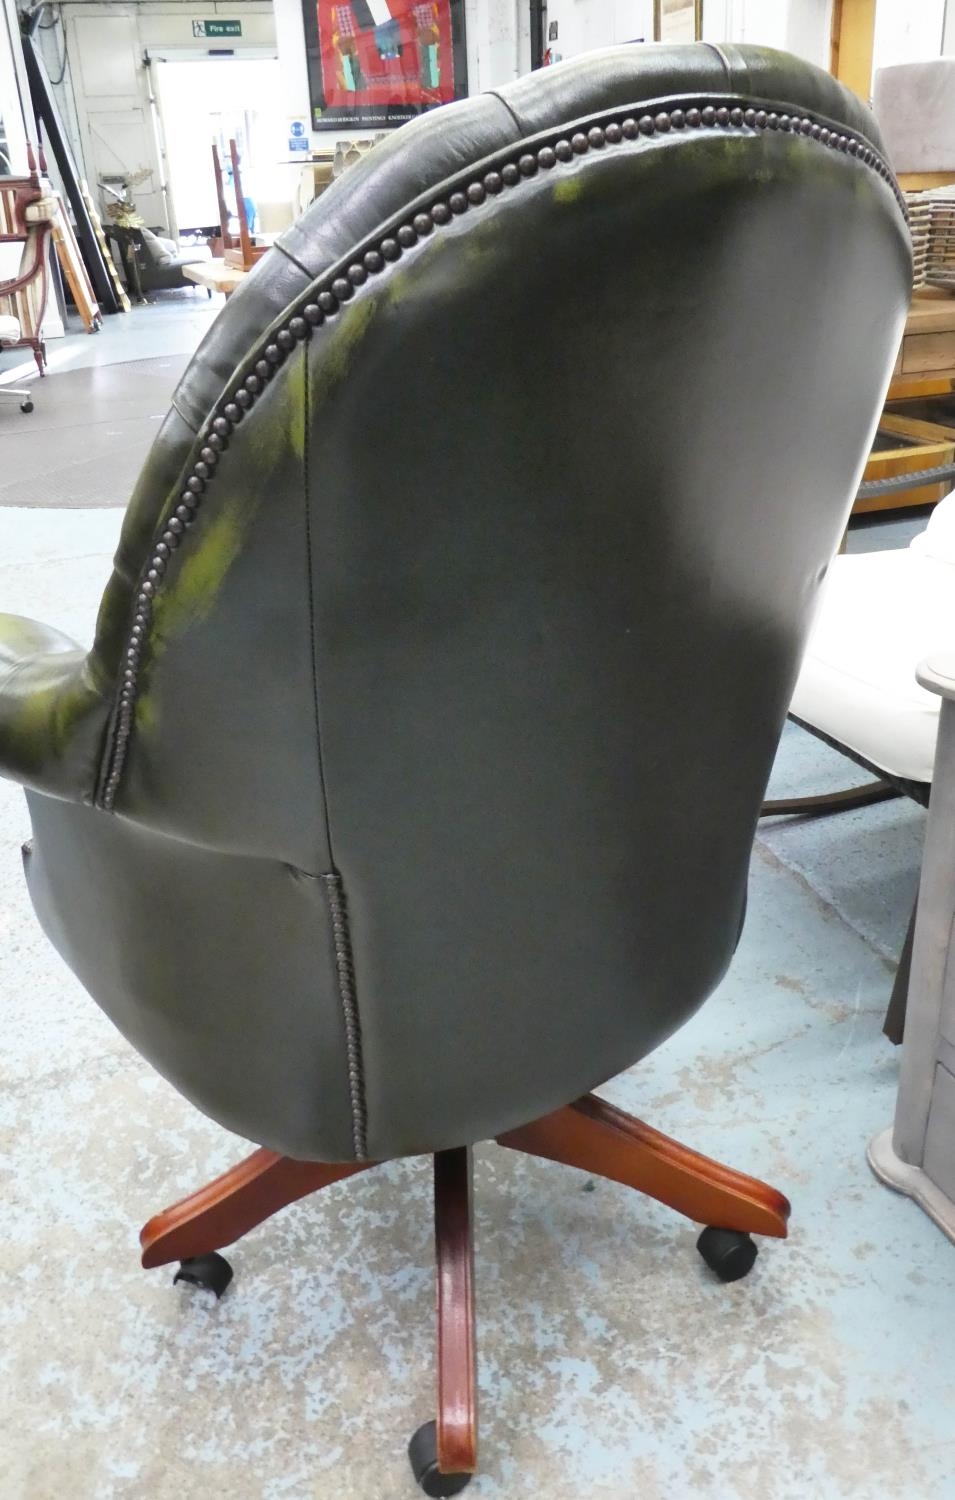 DESK CHAIR, 85cm W x 120cm H, green buttoned leather. - Image 5 of 5